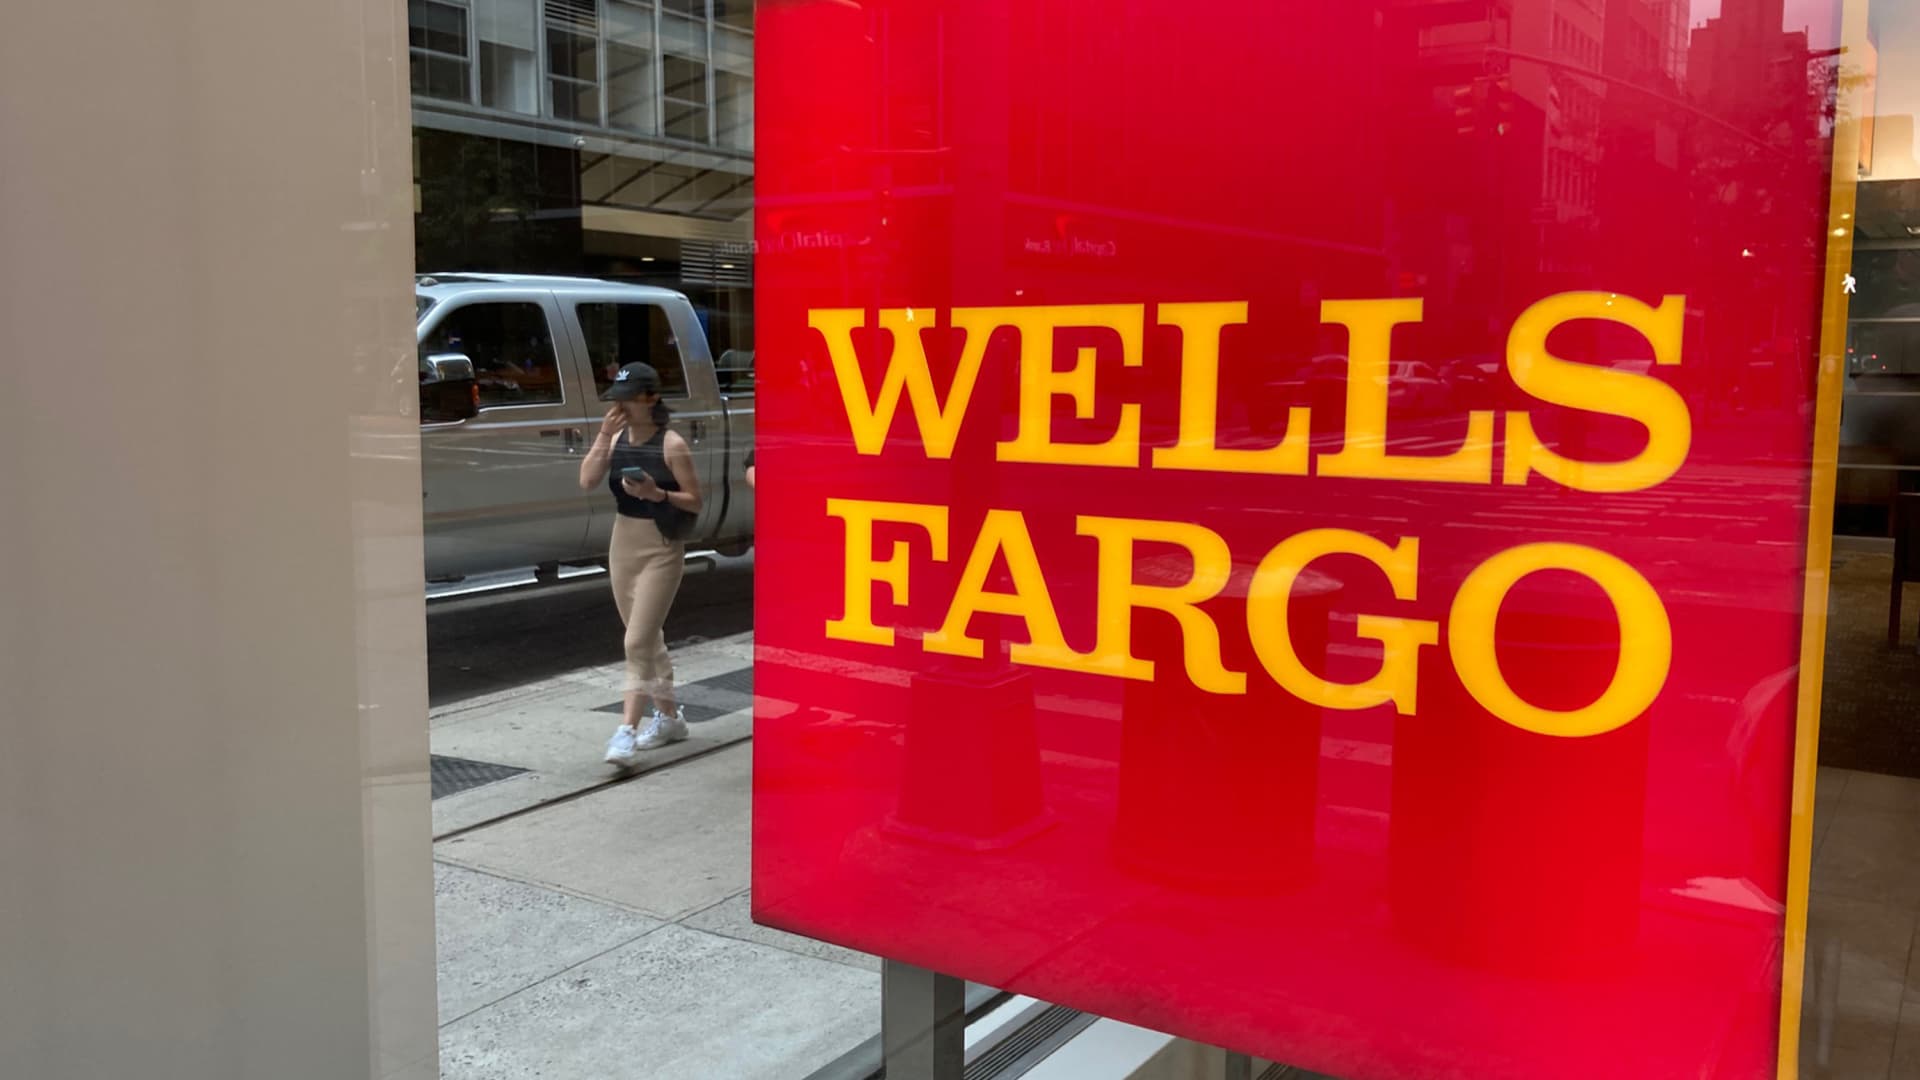 Wells Fargo shares fall as quarterly revenue misses estimates, bank says credit losses to increase